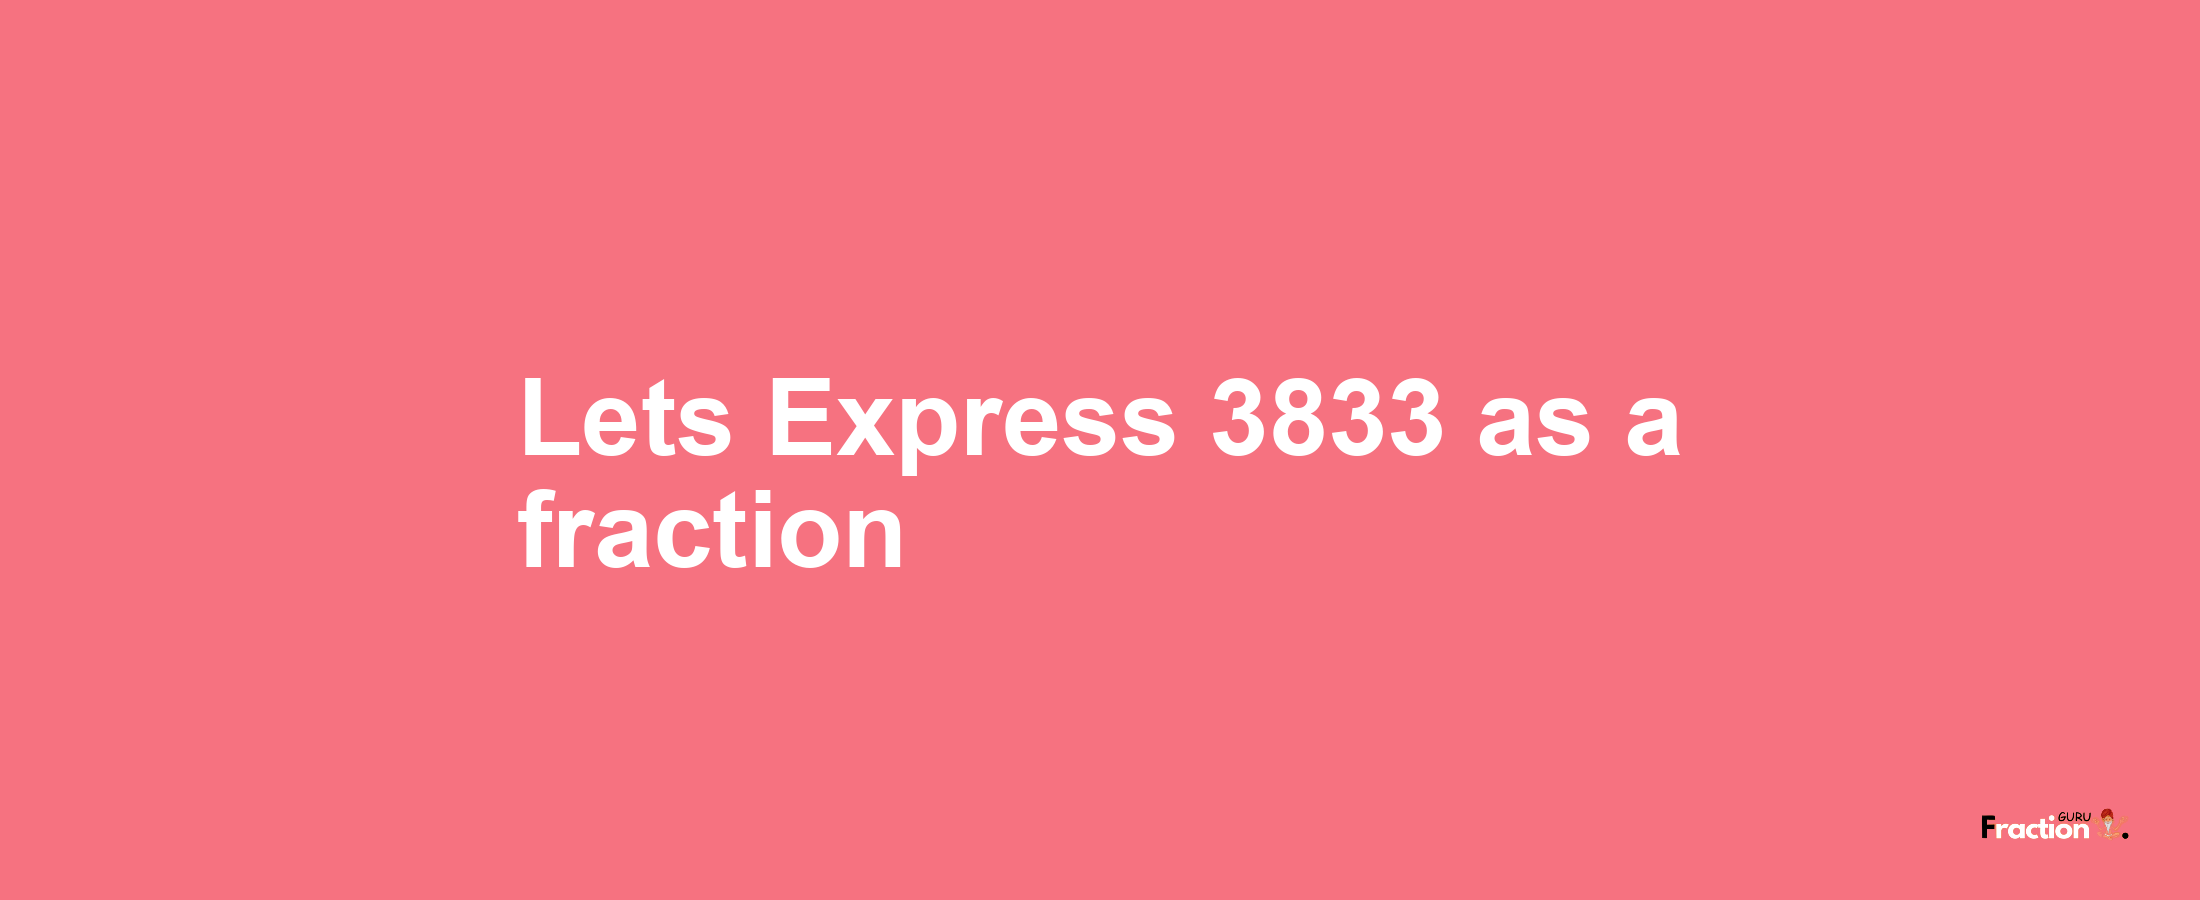 Lets Express 3833 as afraction